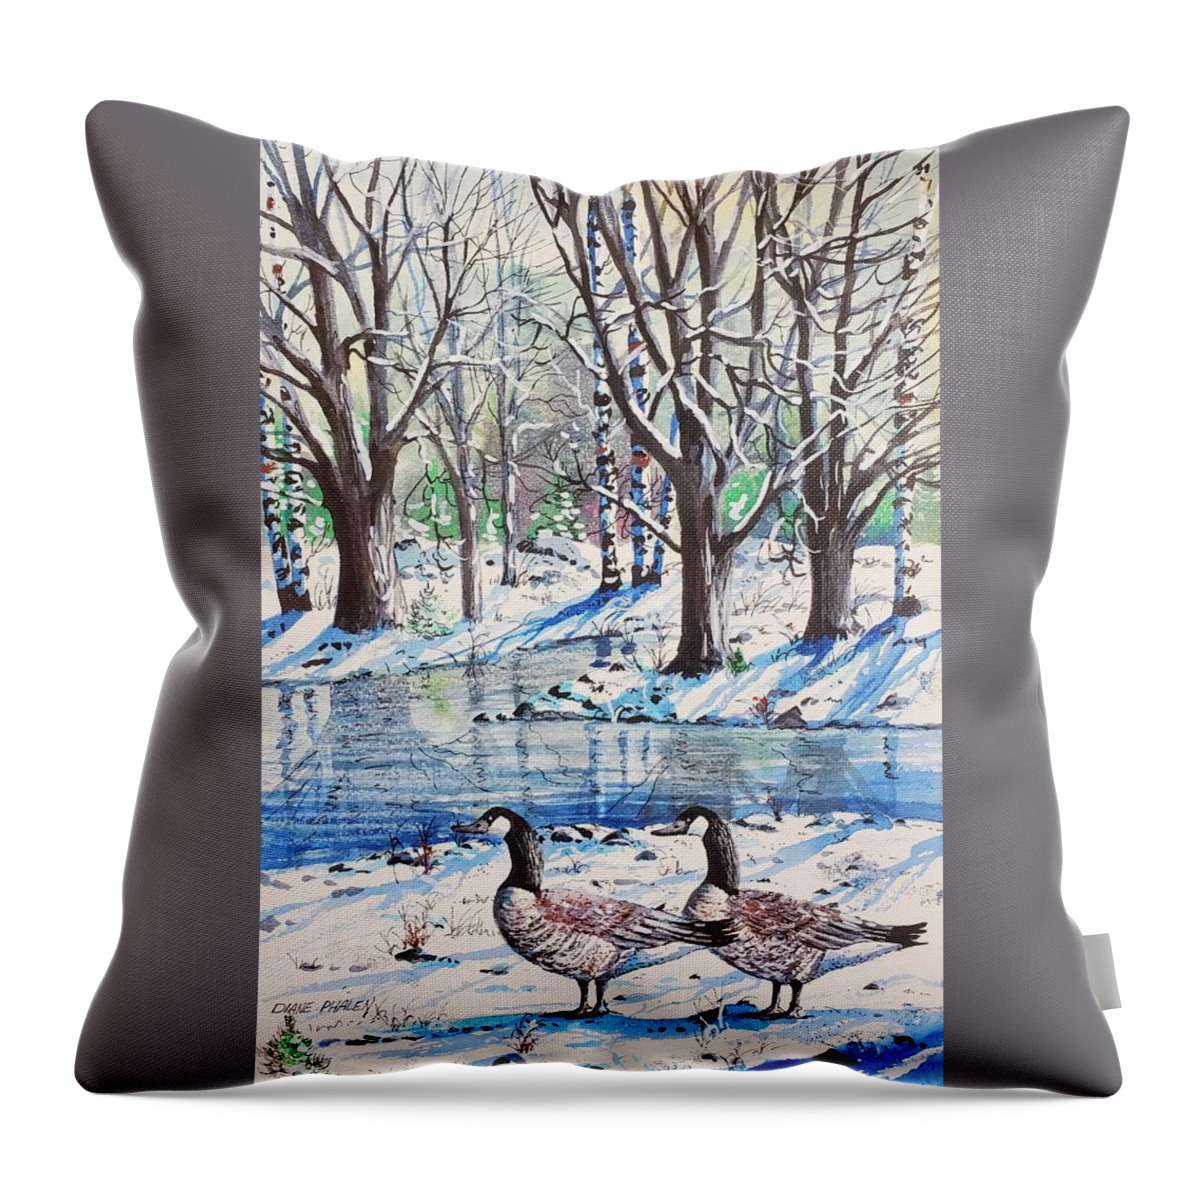 Snow Throw Pillow featuring the painting Snow Reflections by Diane Phalen